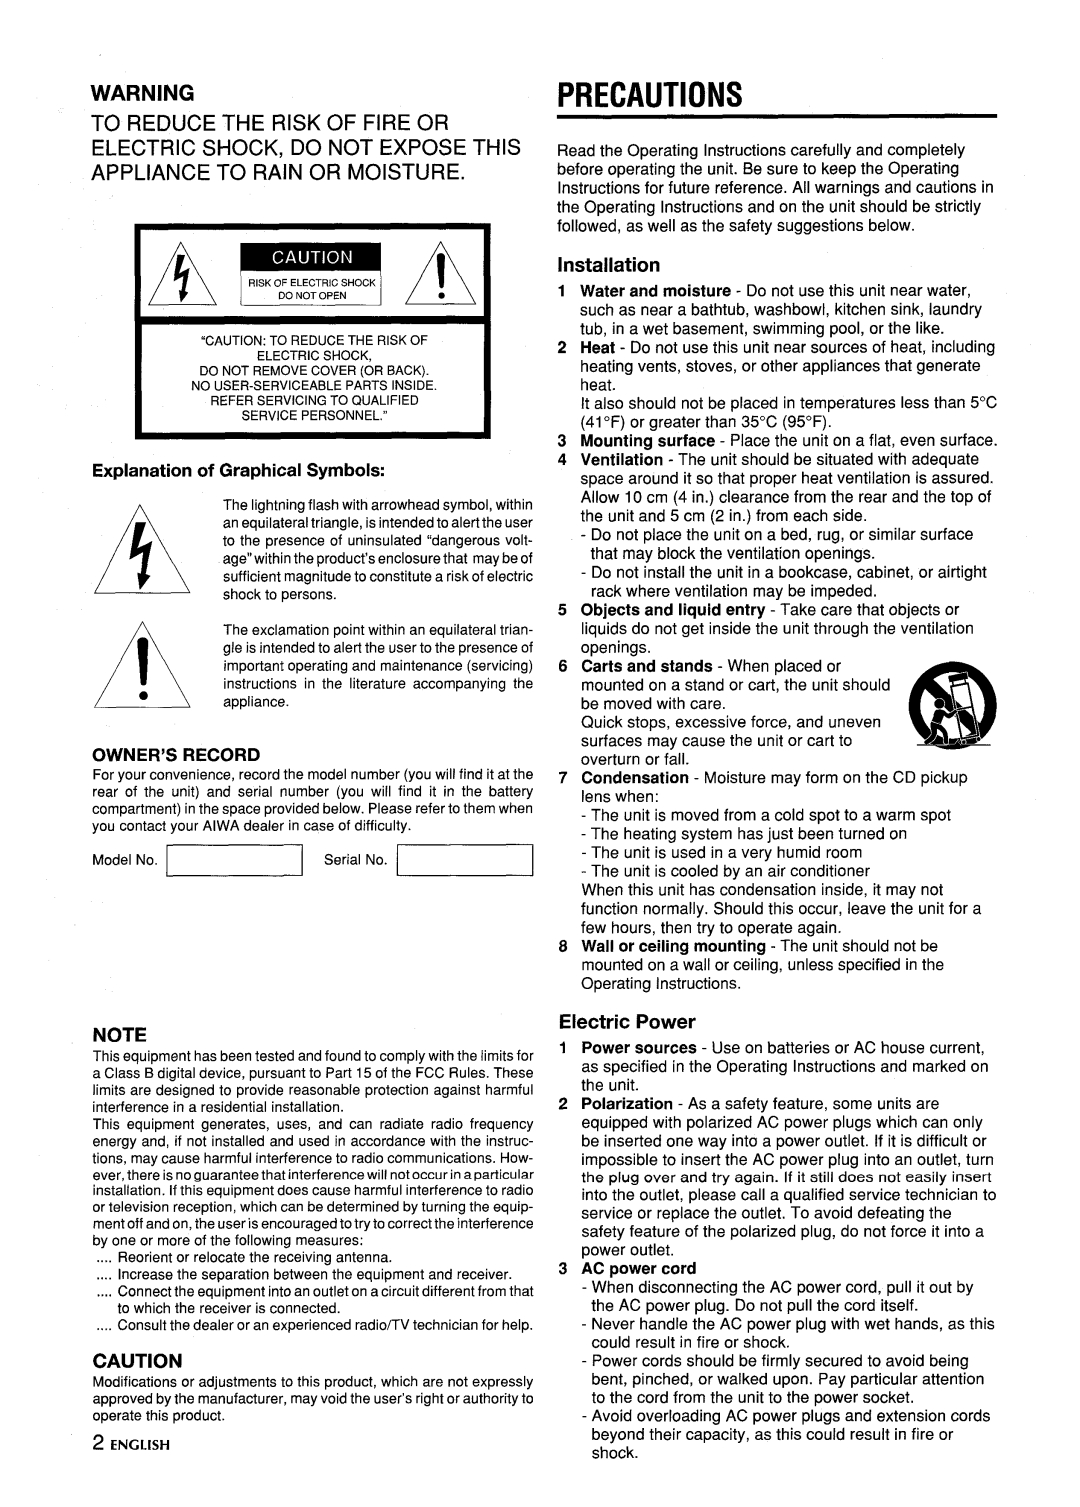 Aiwa CA-DW635 Precautions, Explanation of Graphical Symbols, Installation, Owner’S Record, Electric Power, AC power cord 